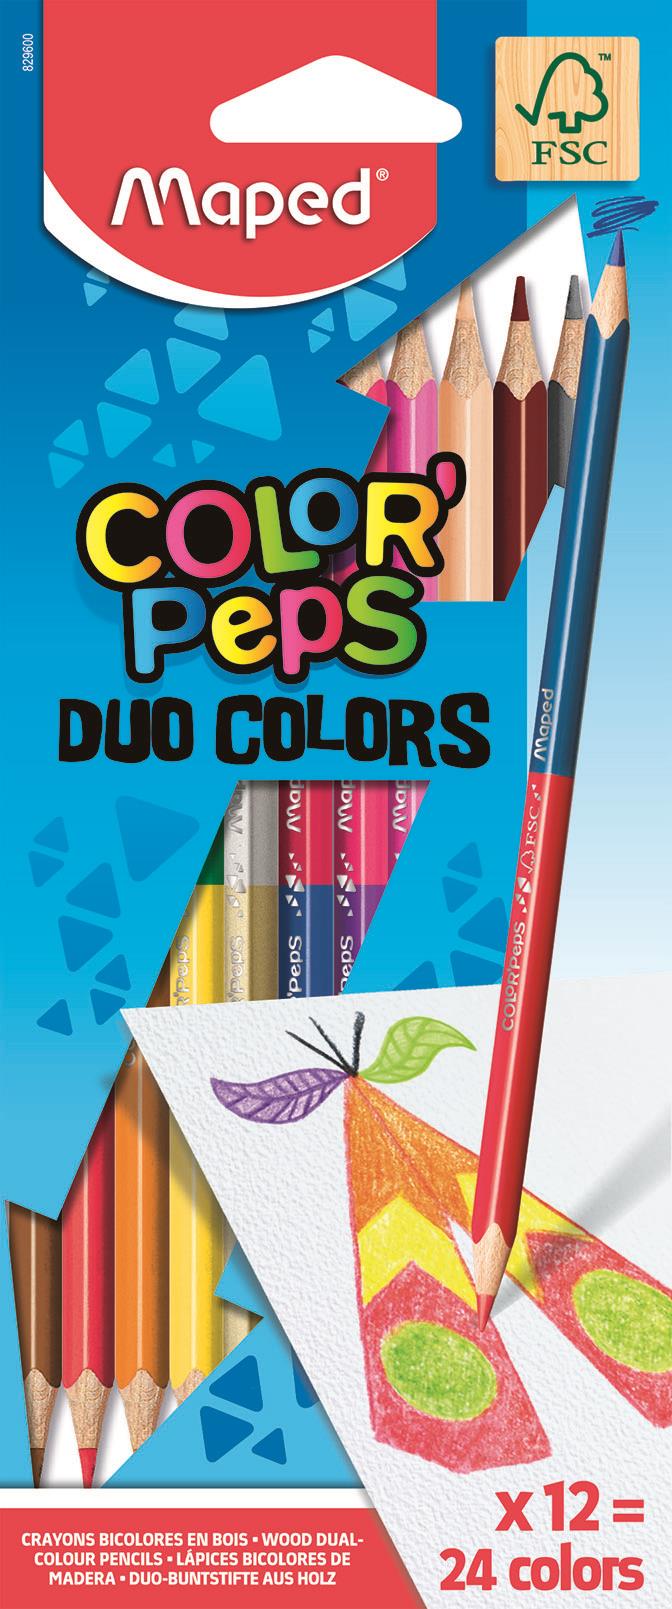 Maped Colour'Peps Duo Colouring pencils x12